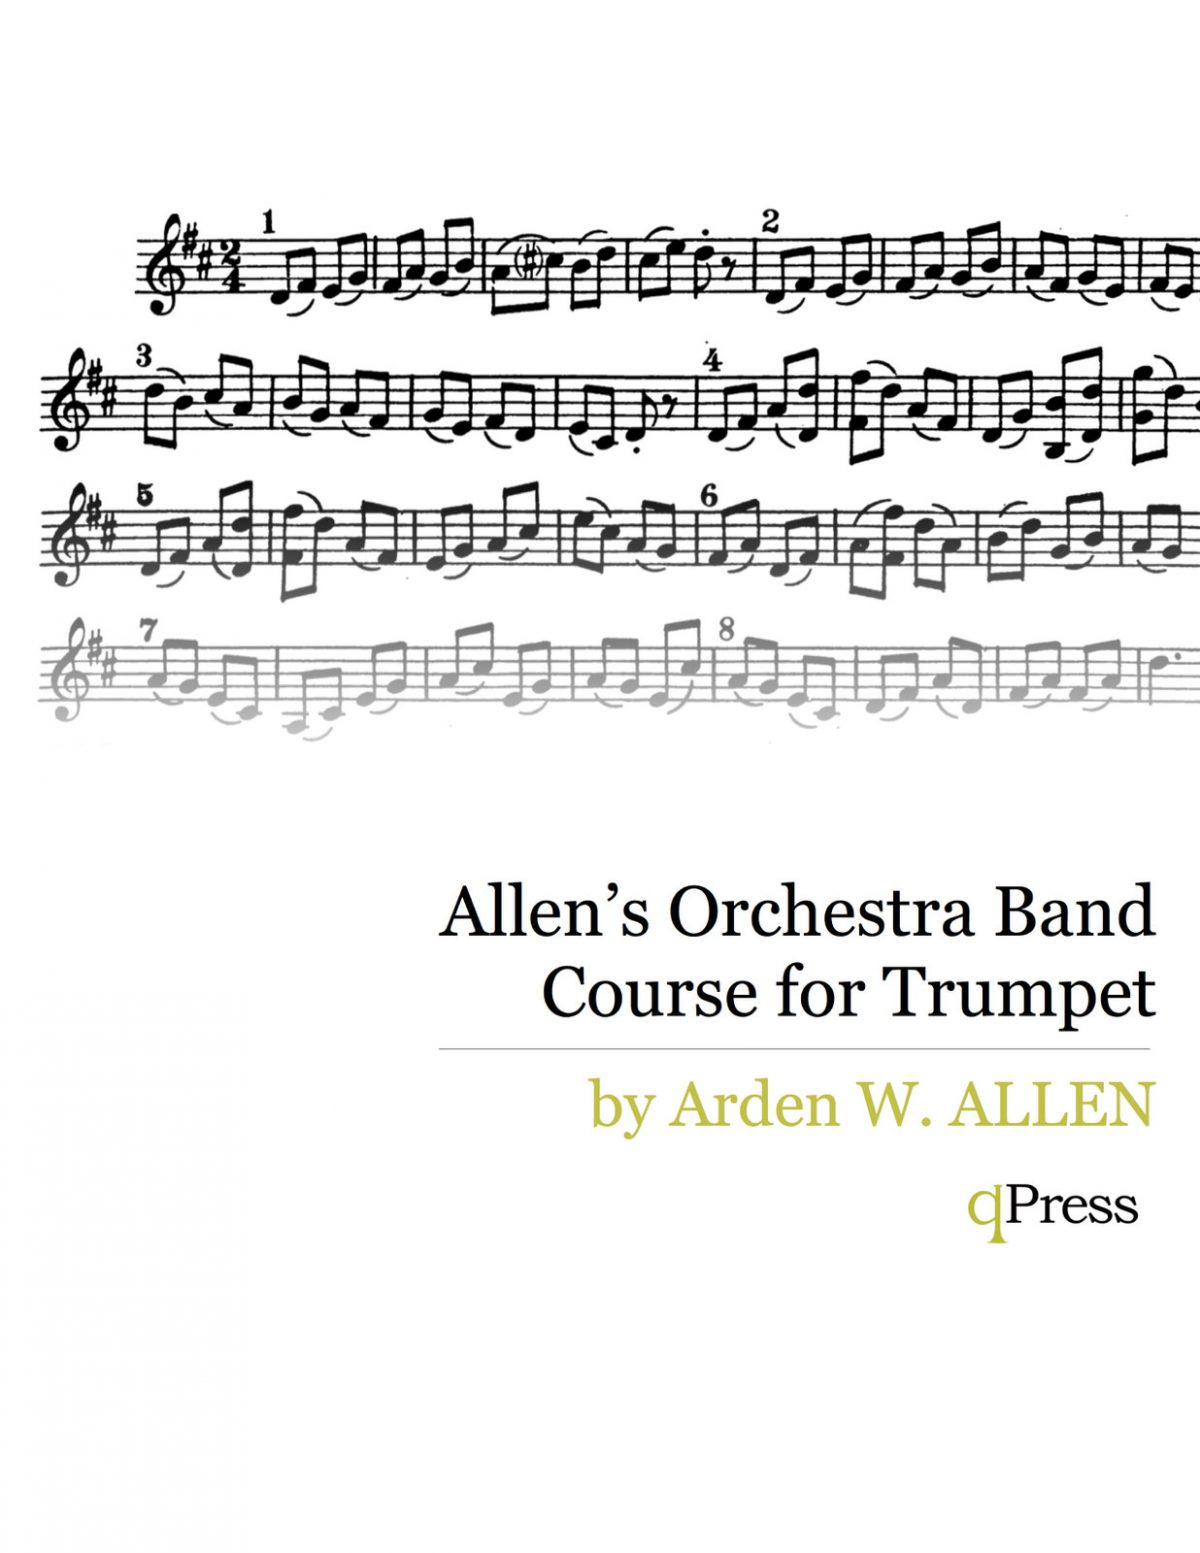 Allen's Orchestra Band Class Course for Trumpet